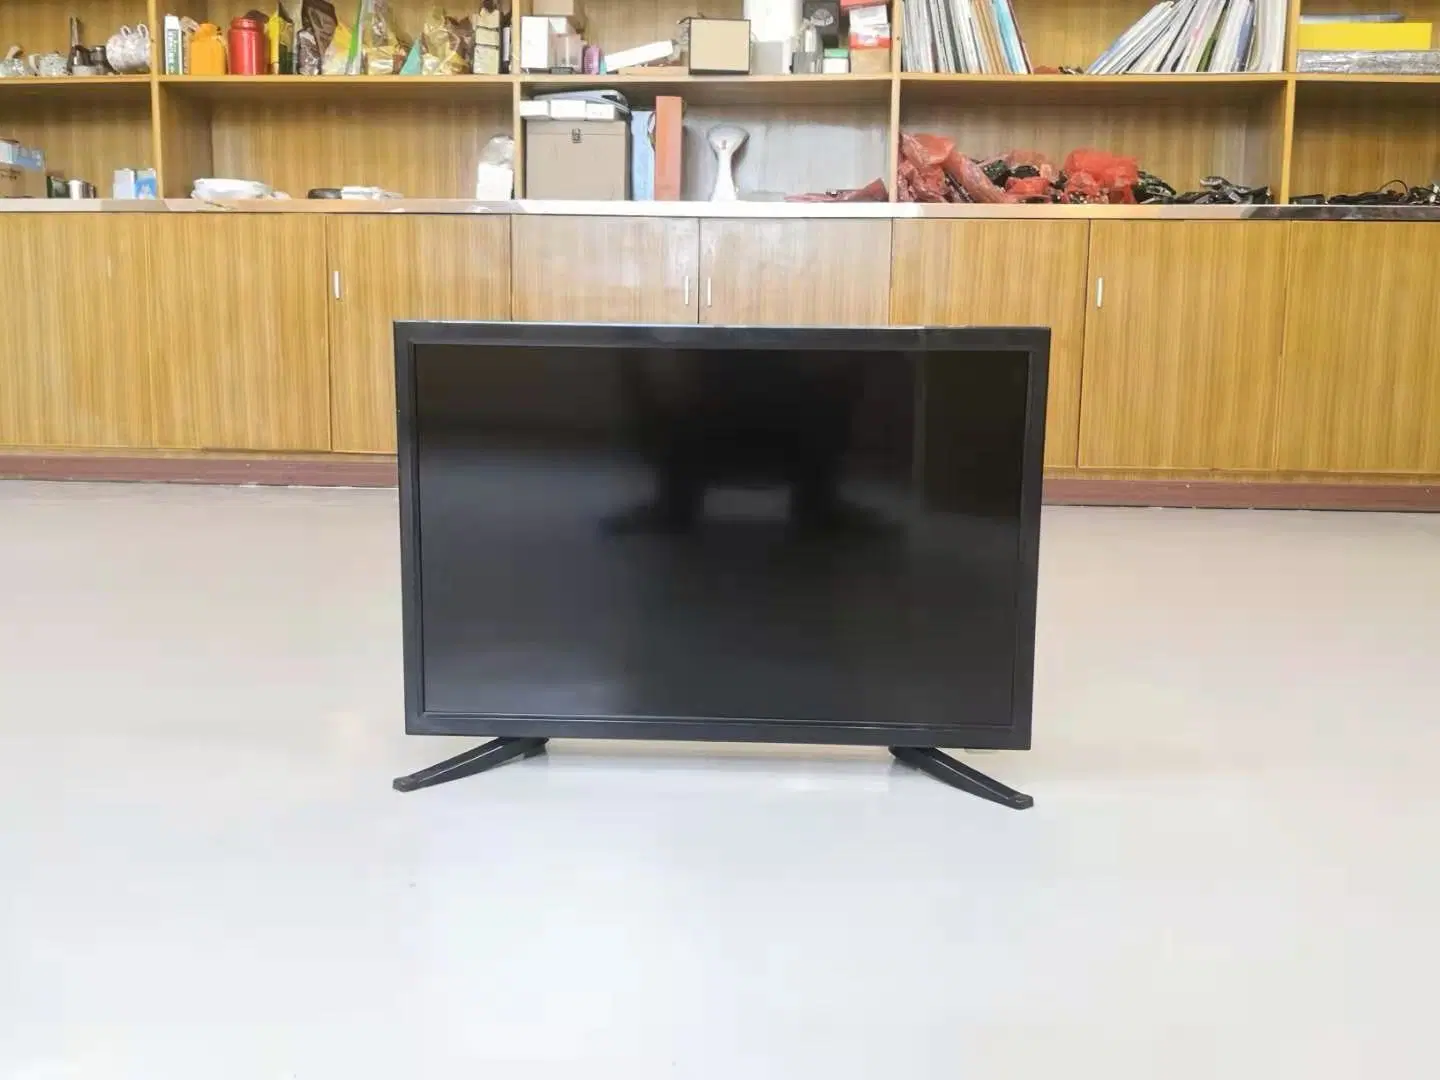 15" 17" 19" 22" 24" 26" Inch TV Small Size AC DC TV Solar Powered TV Good Quality HD LCD LED DVB T2 S2 Television Cheap Price